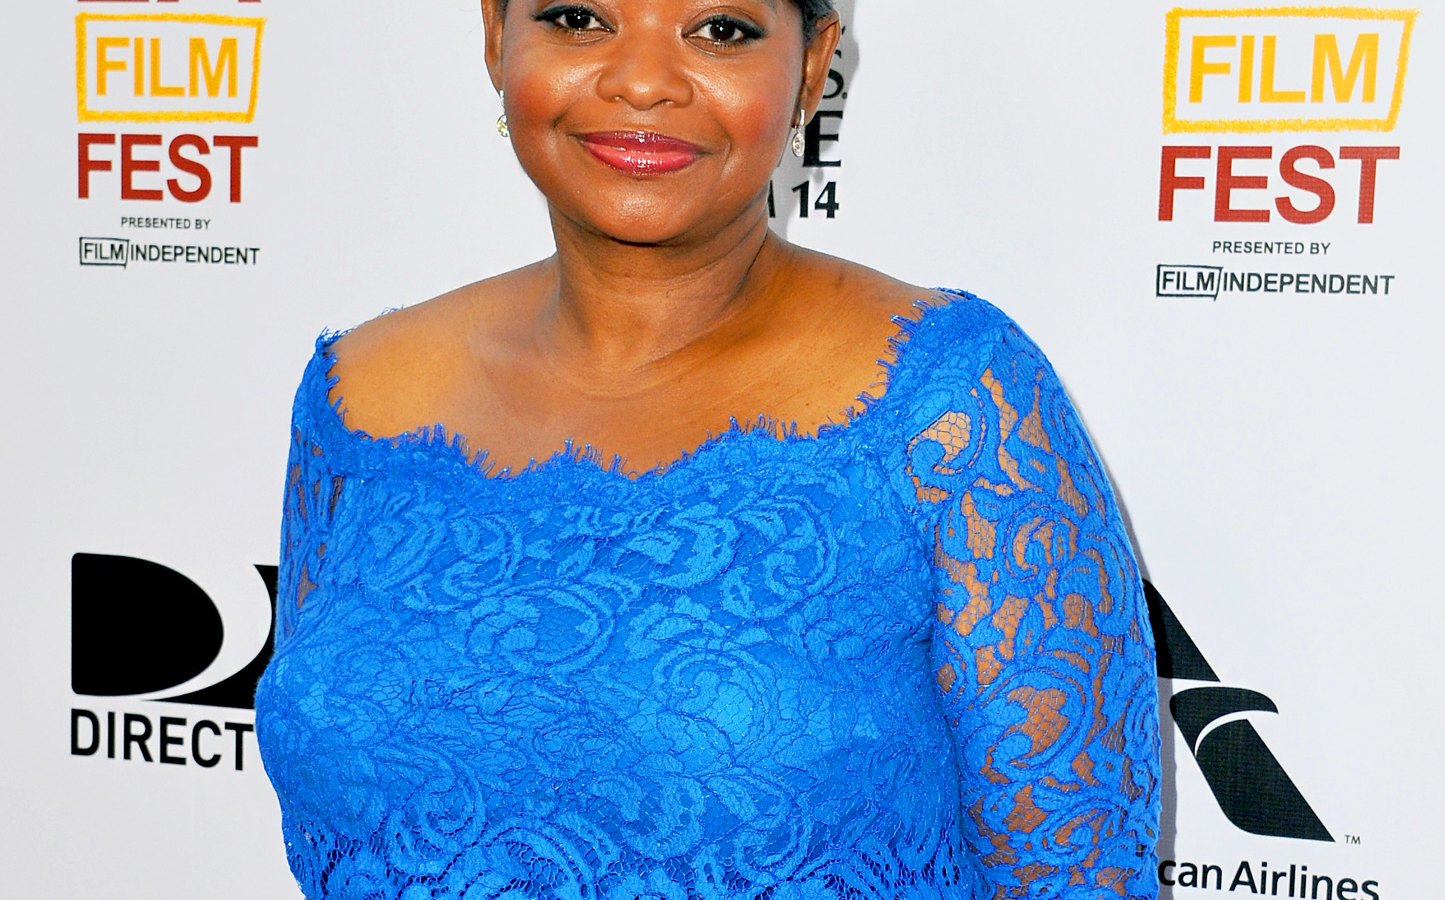 Octavia Spencer has signed on to play Jessica Fletcher in Murder, She